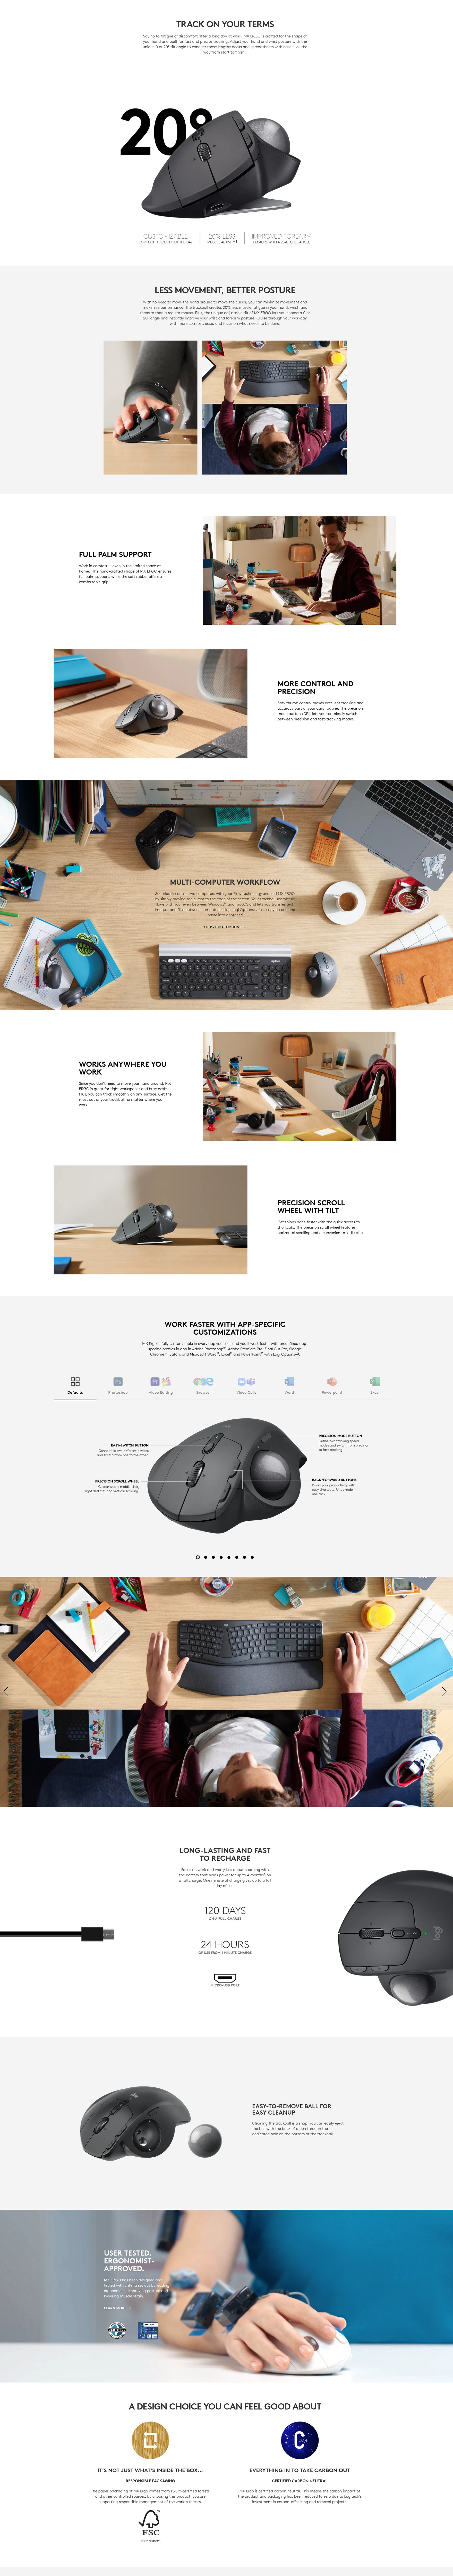 A large marketing image providing additional information about the product Logitech MX Ergo Advanced Wireless Trackball with Tilt Plate - Additional alt info not provided